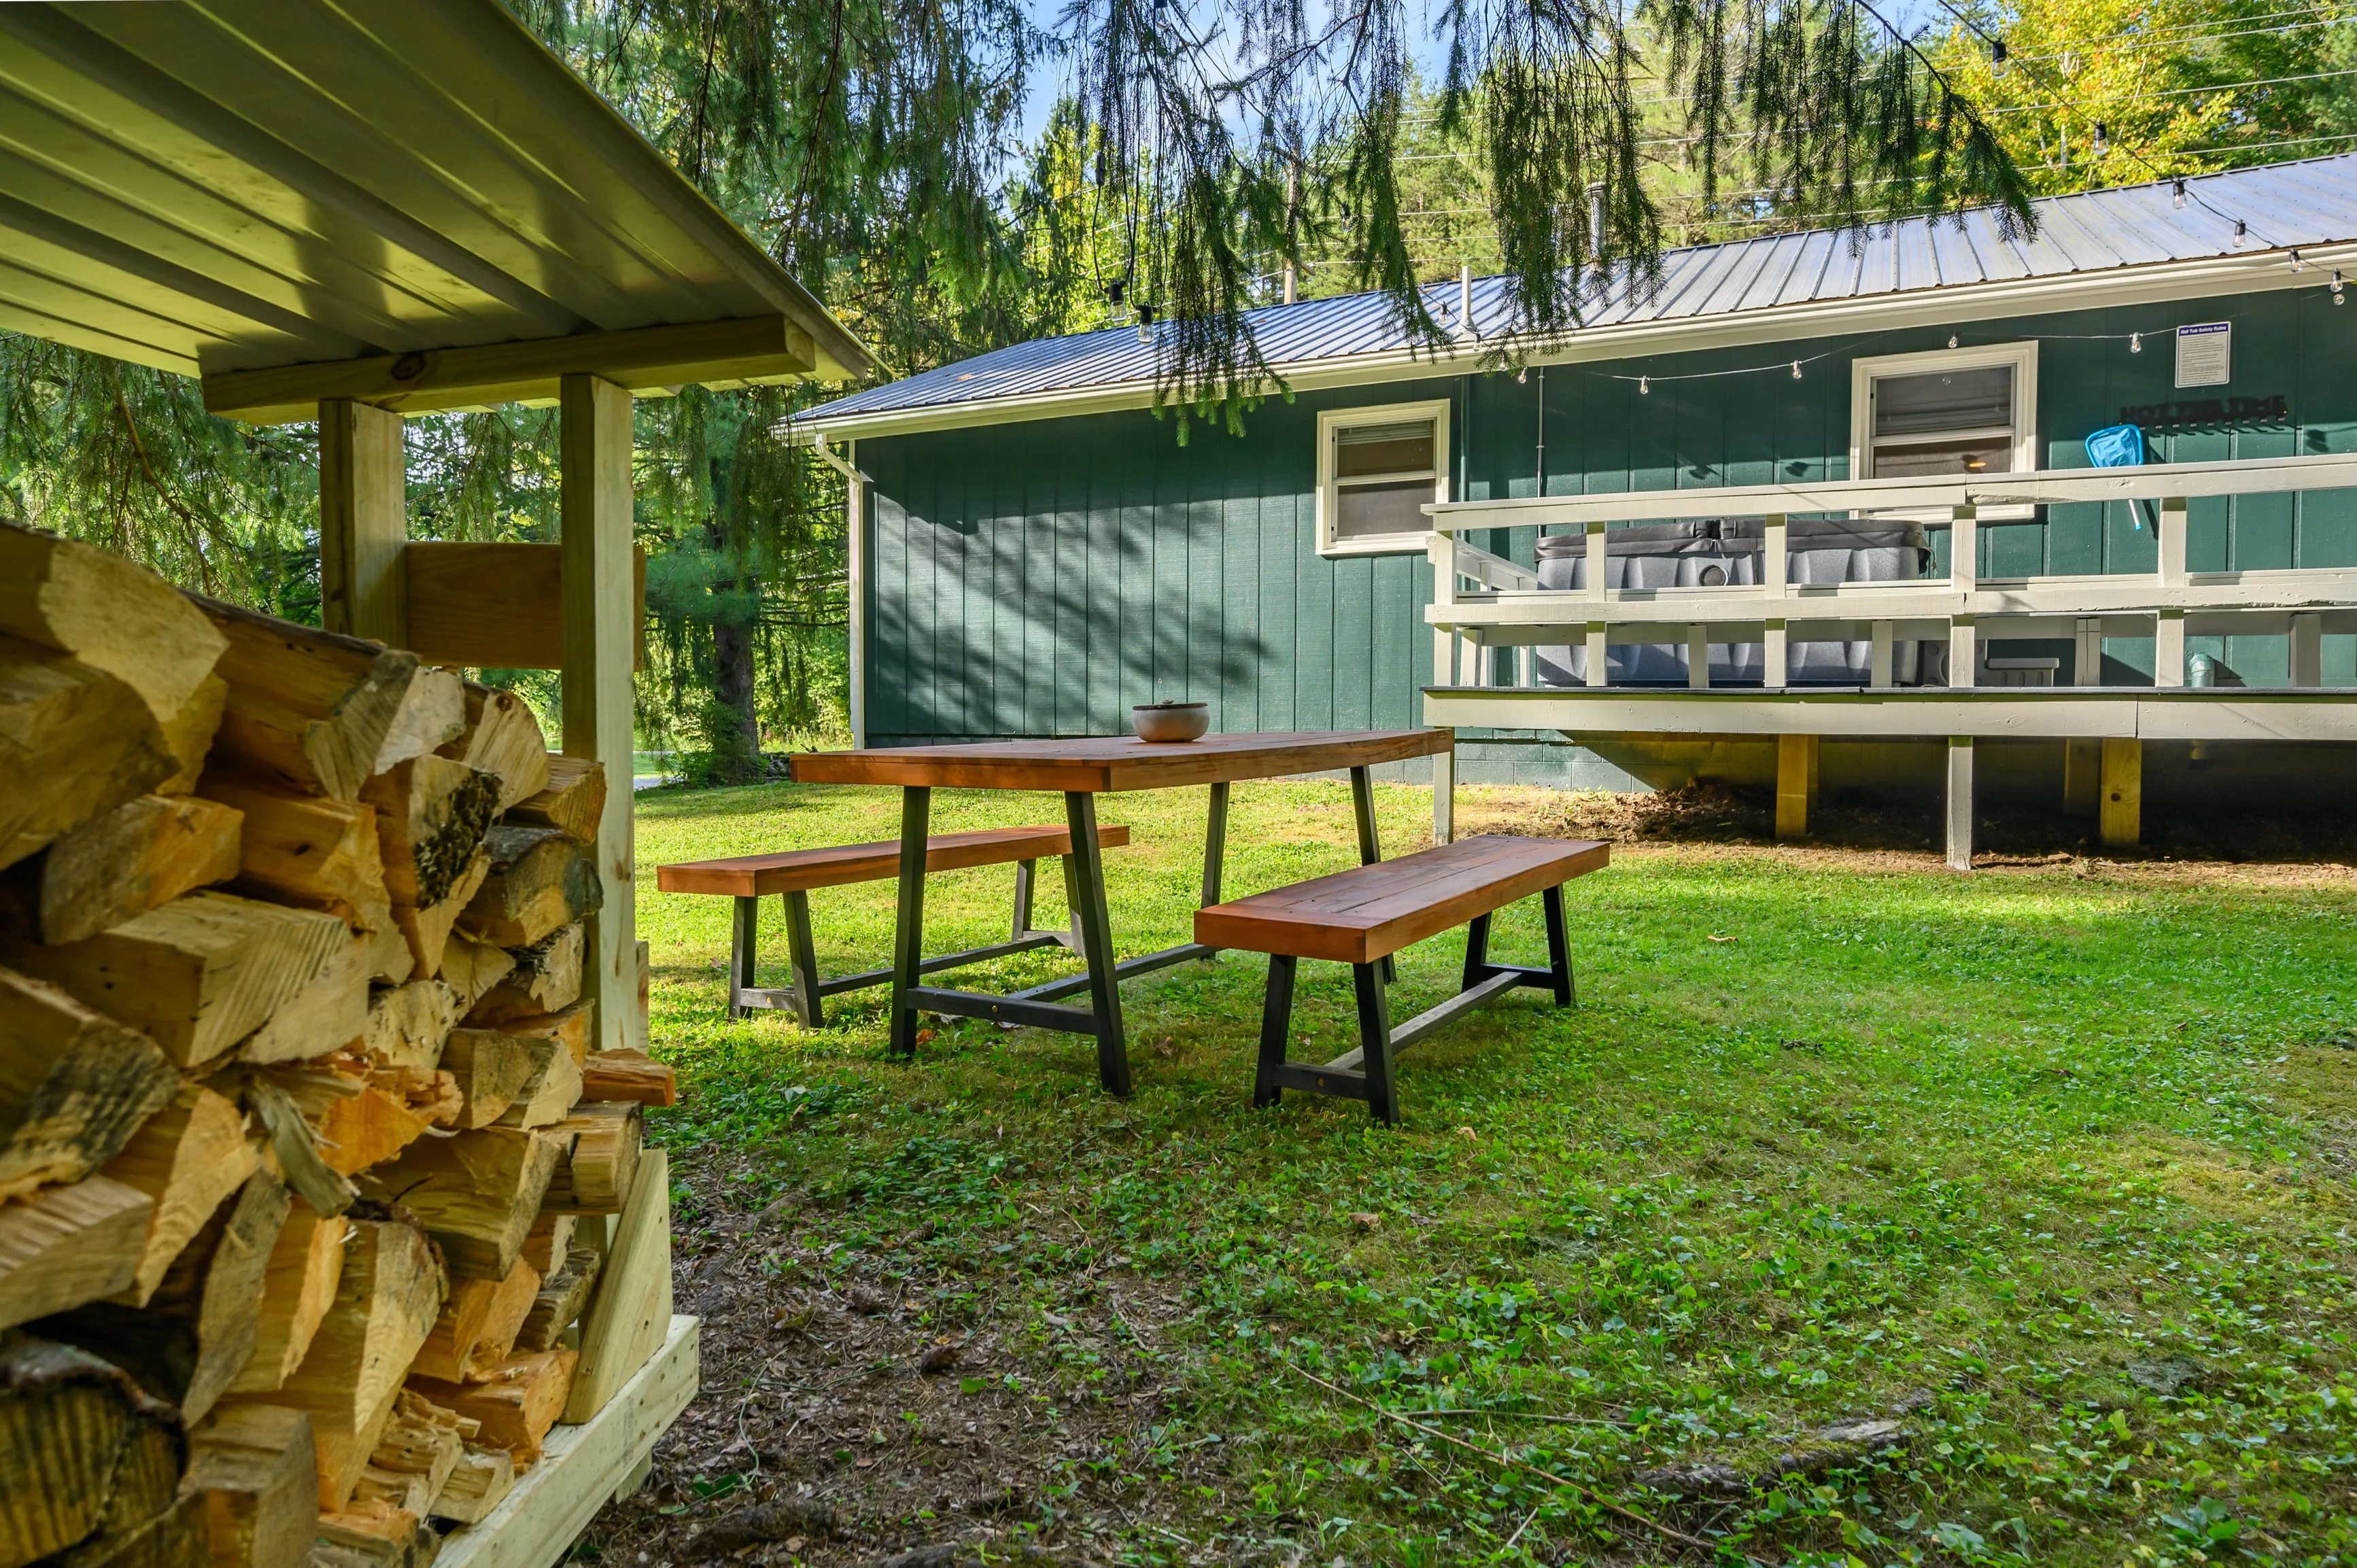 Wooden picnic table and pile of chopped firewood next to a green cabin with a porch in a forested area.